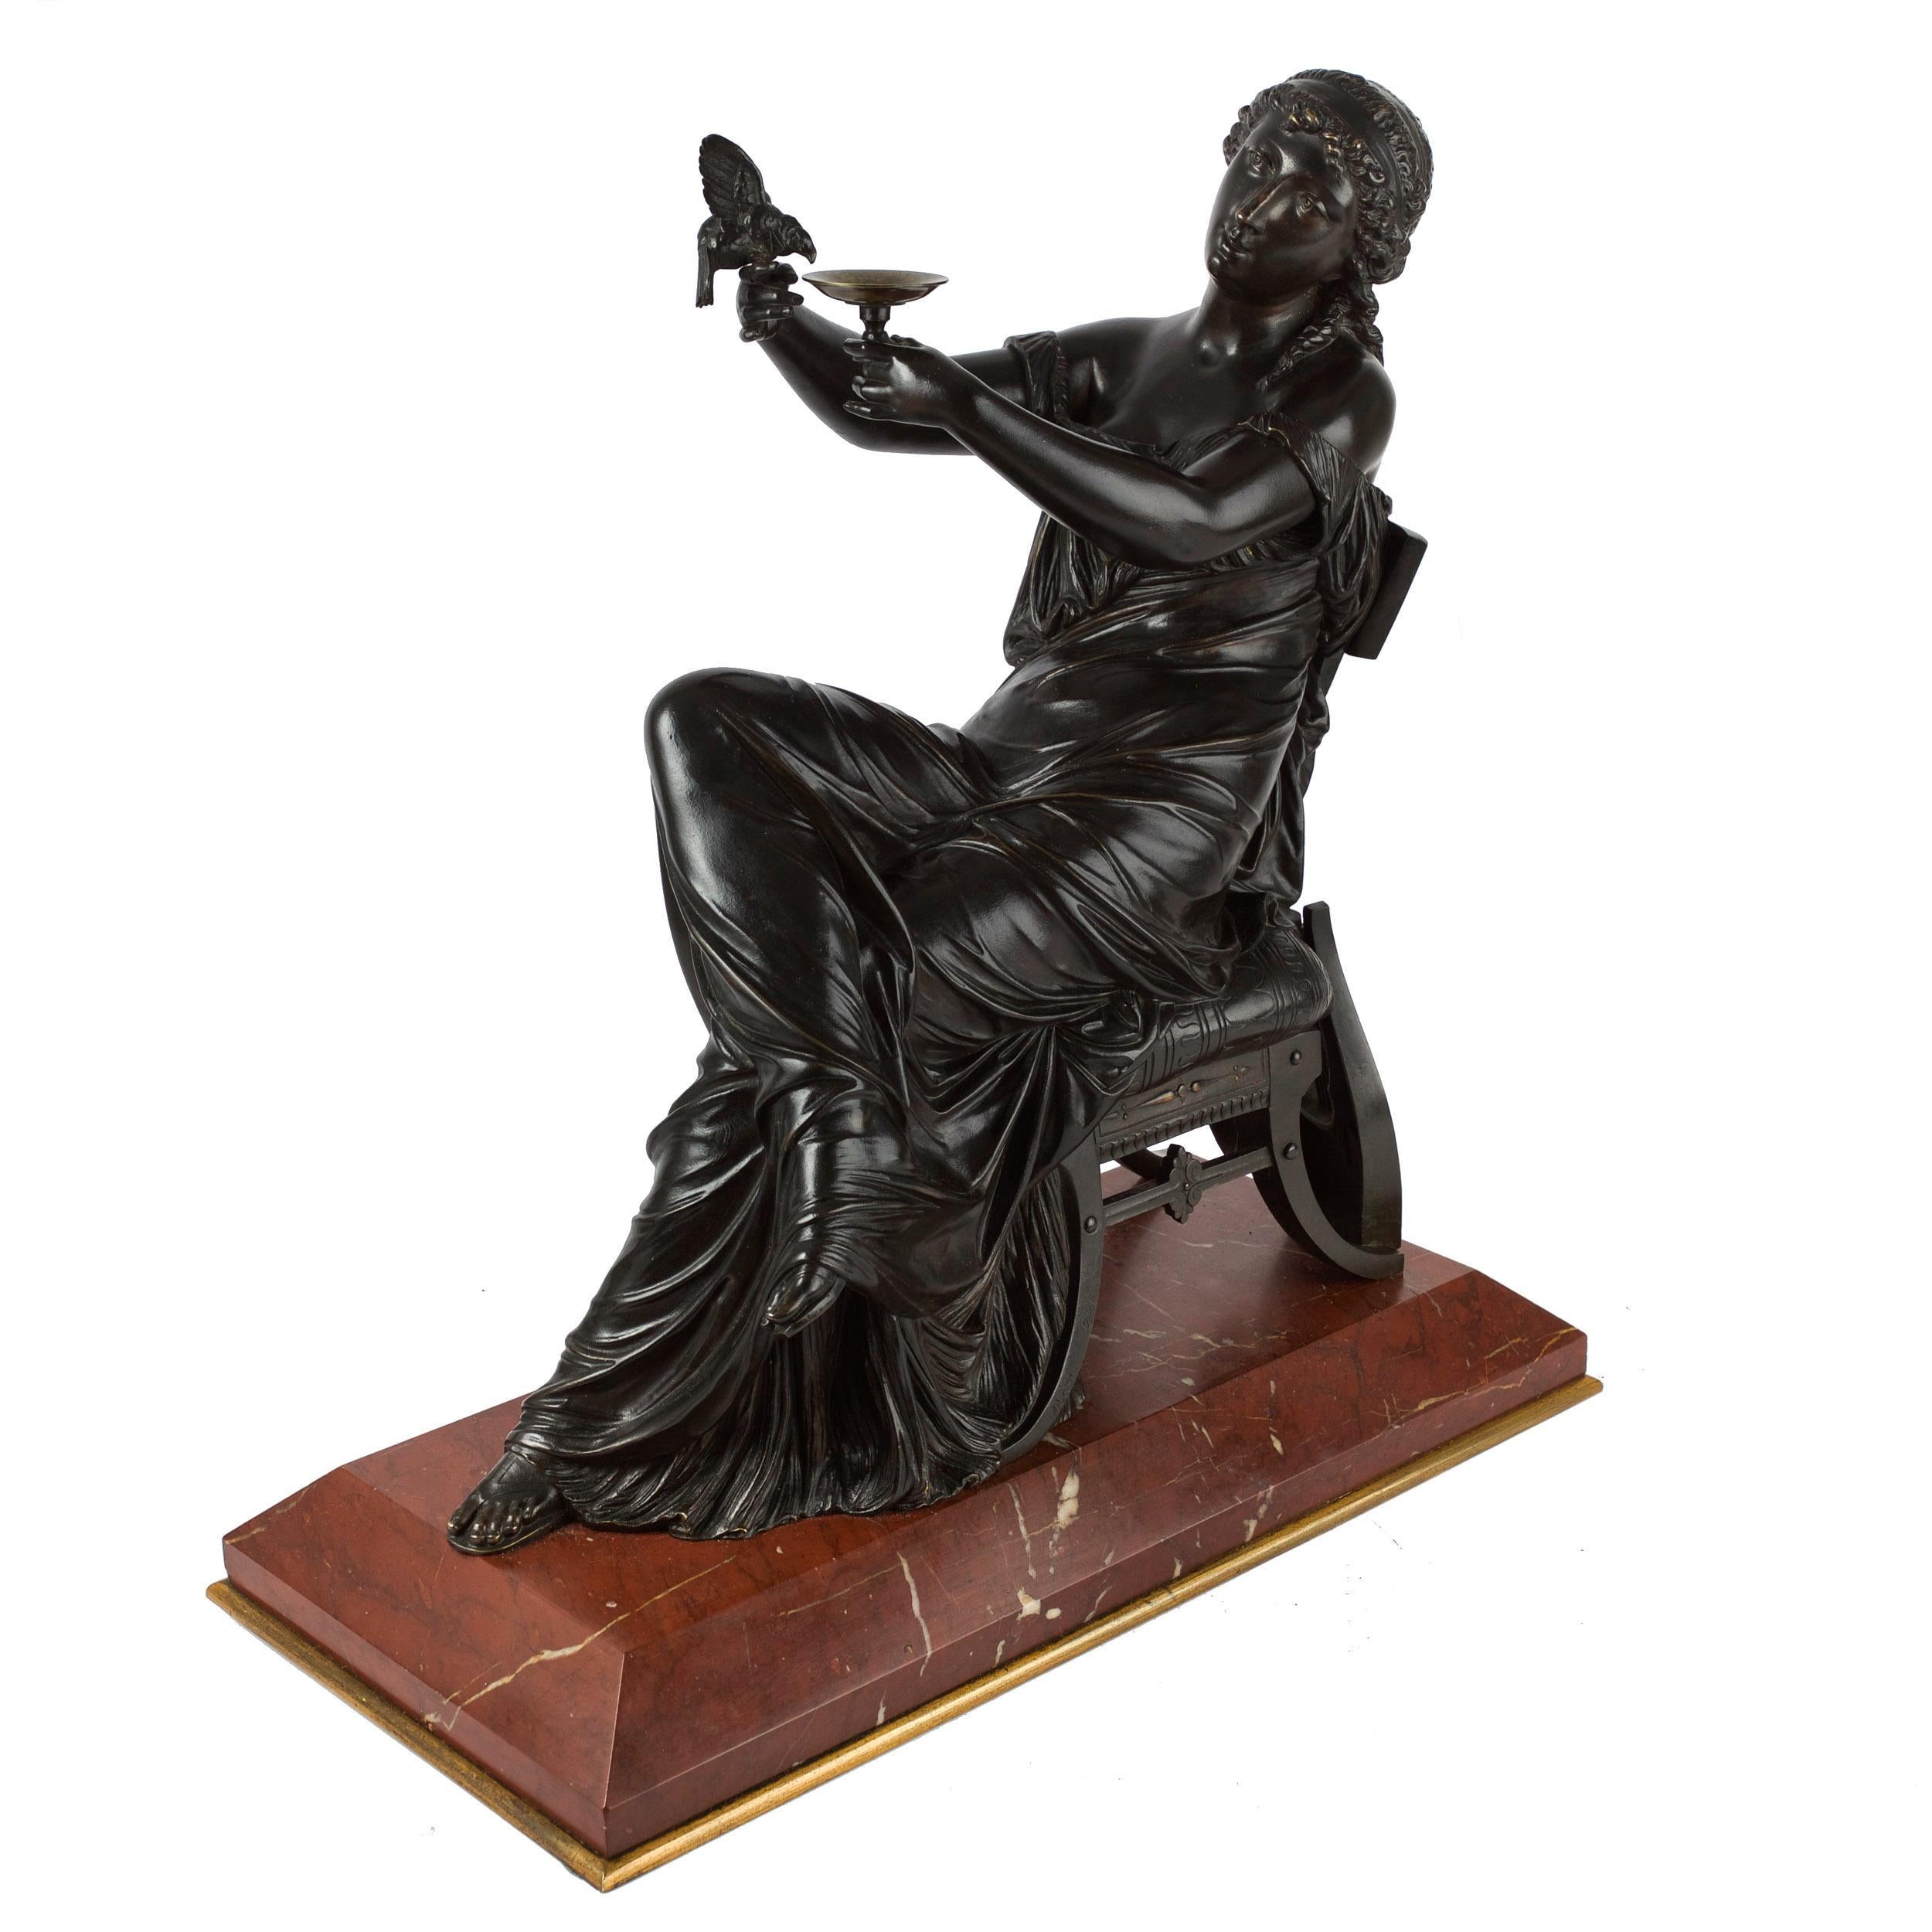 A fine sand-cast model of a seated figure of Sappho circa the third quarter of the 19th century, she is an attractive composition featuring a Neo-Greco overall inspiration with a classical garment draped with endless folds over her lounging figure;